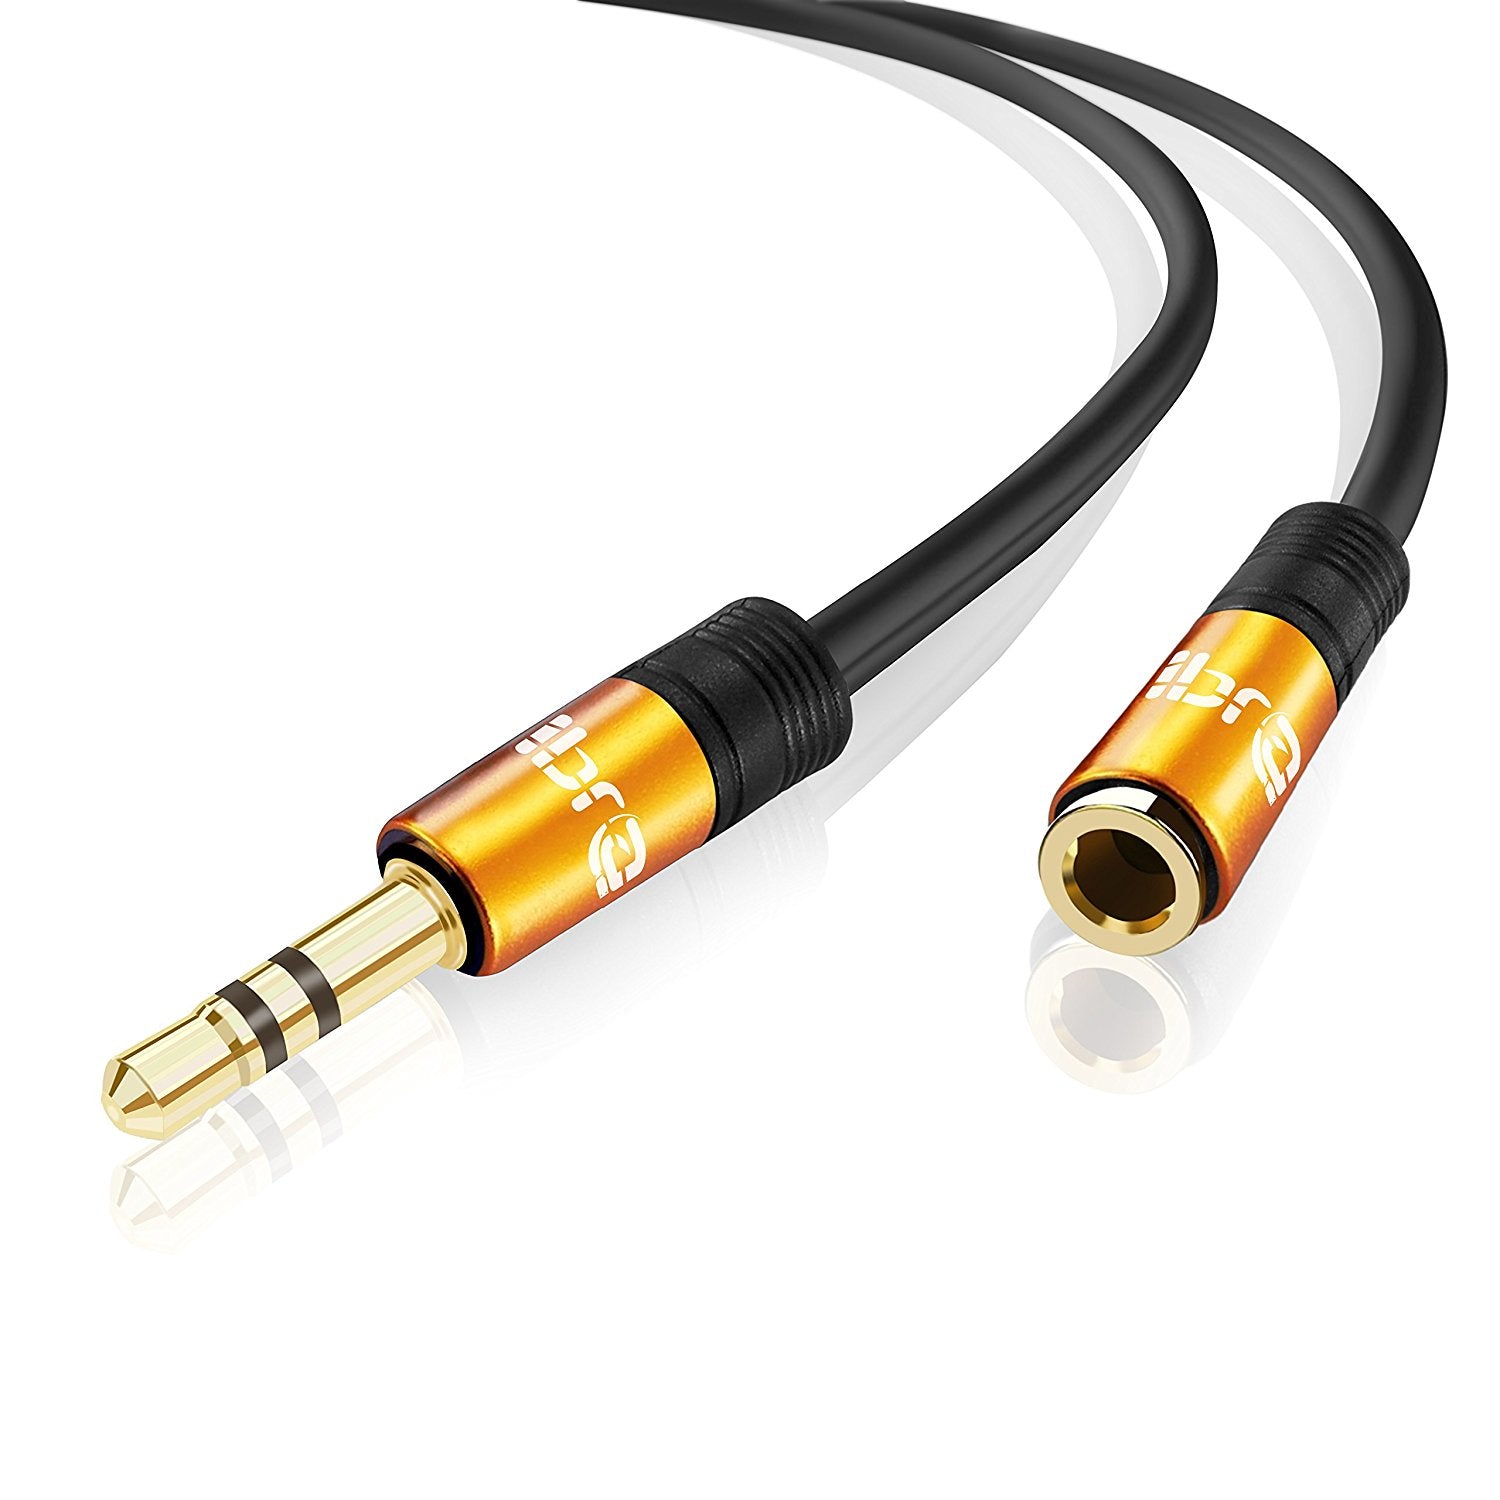 IBRA 5M Stereo Jack Extension Cable 3.5mm Male > 3.5mm Female - Orange